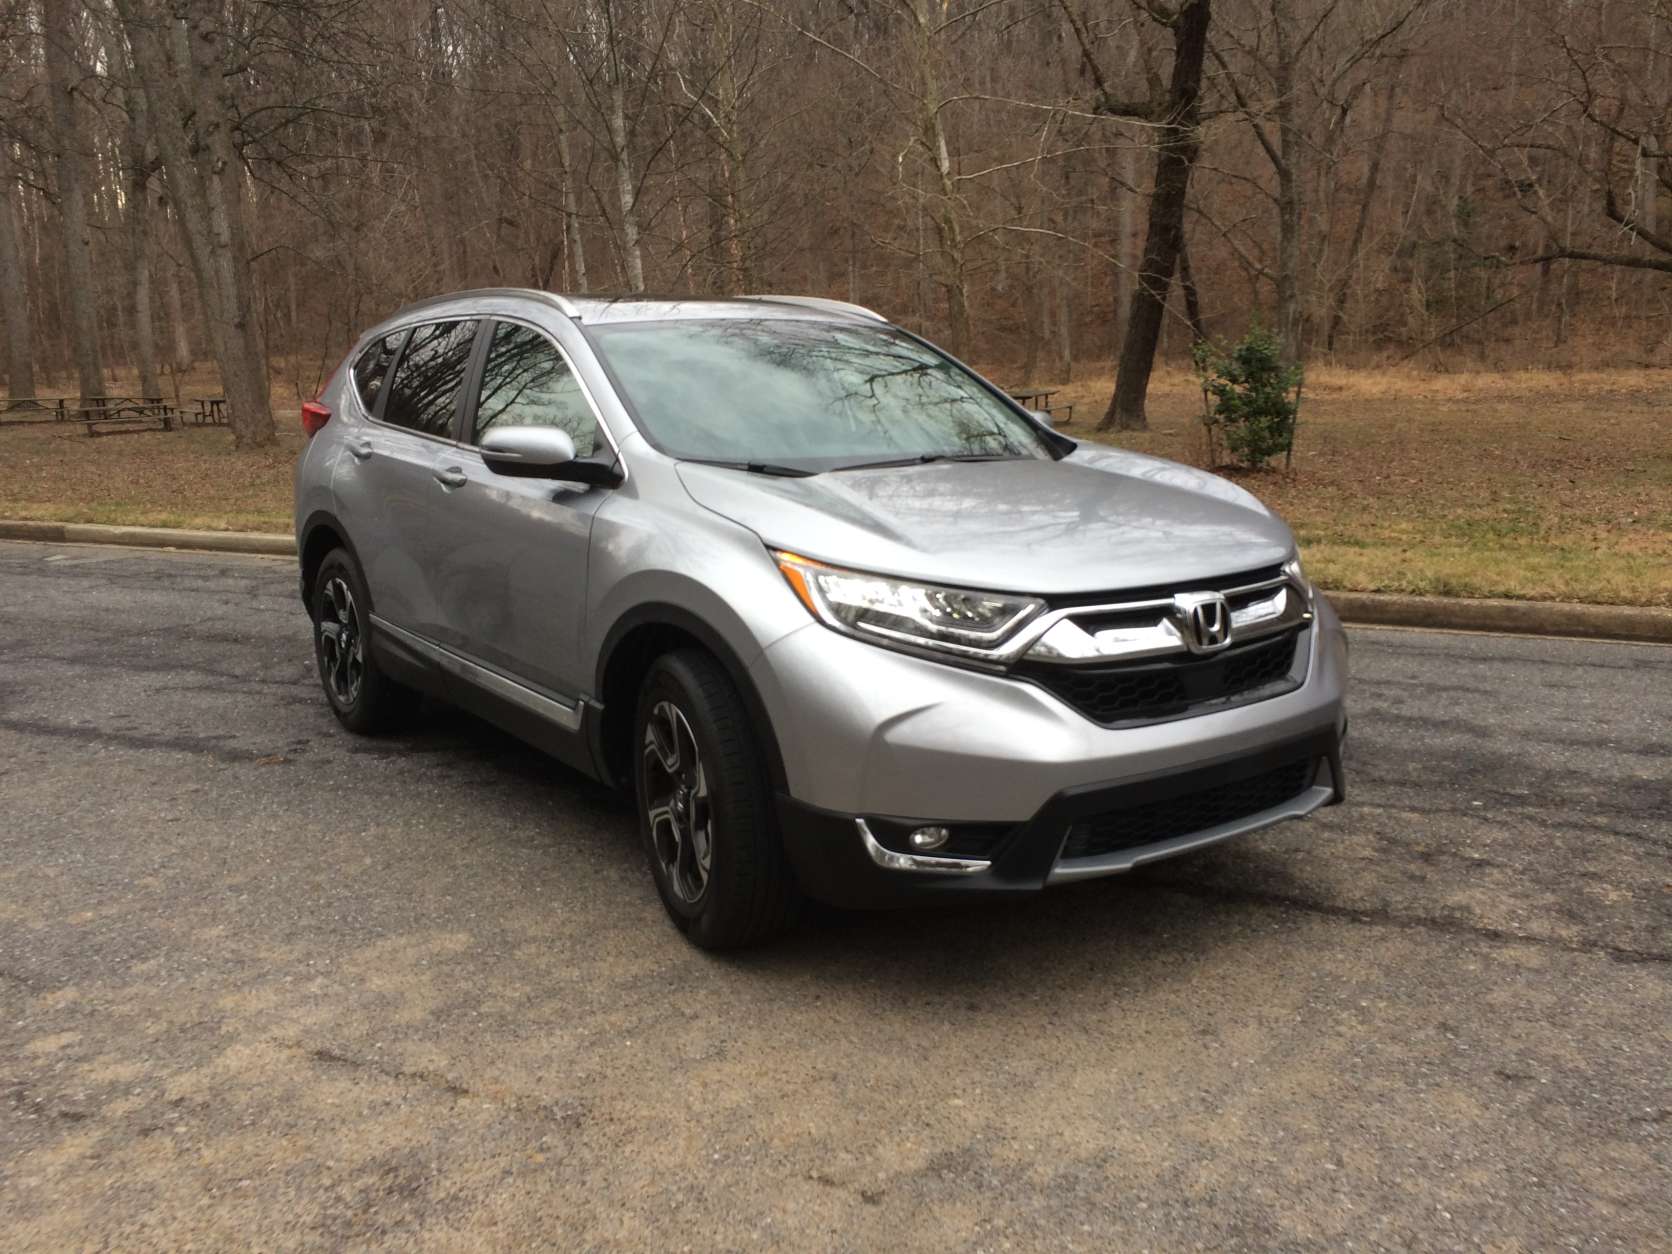 A new turbo engine that allows for improved fuel economy and a lot of safety features makes the 2017 Honda CR-V is a smart choice, according to WTOP’s car columnist Mike Parris. (WTOP/Mike Parris)